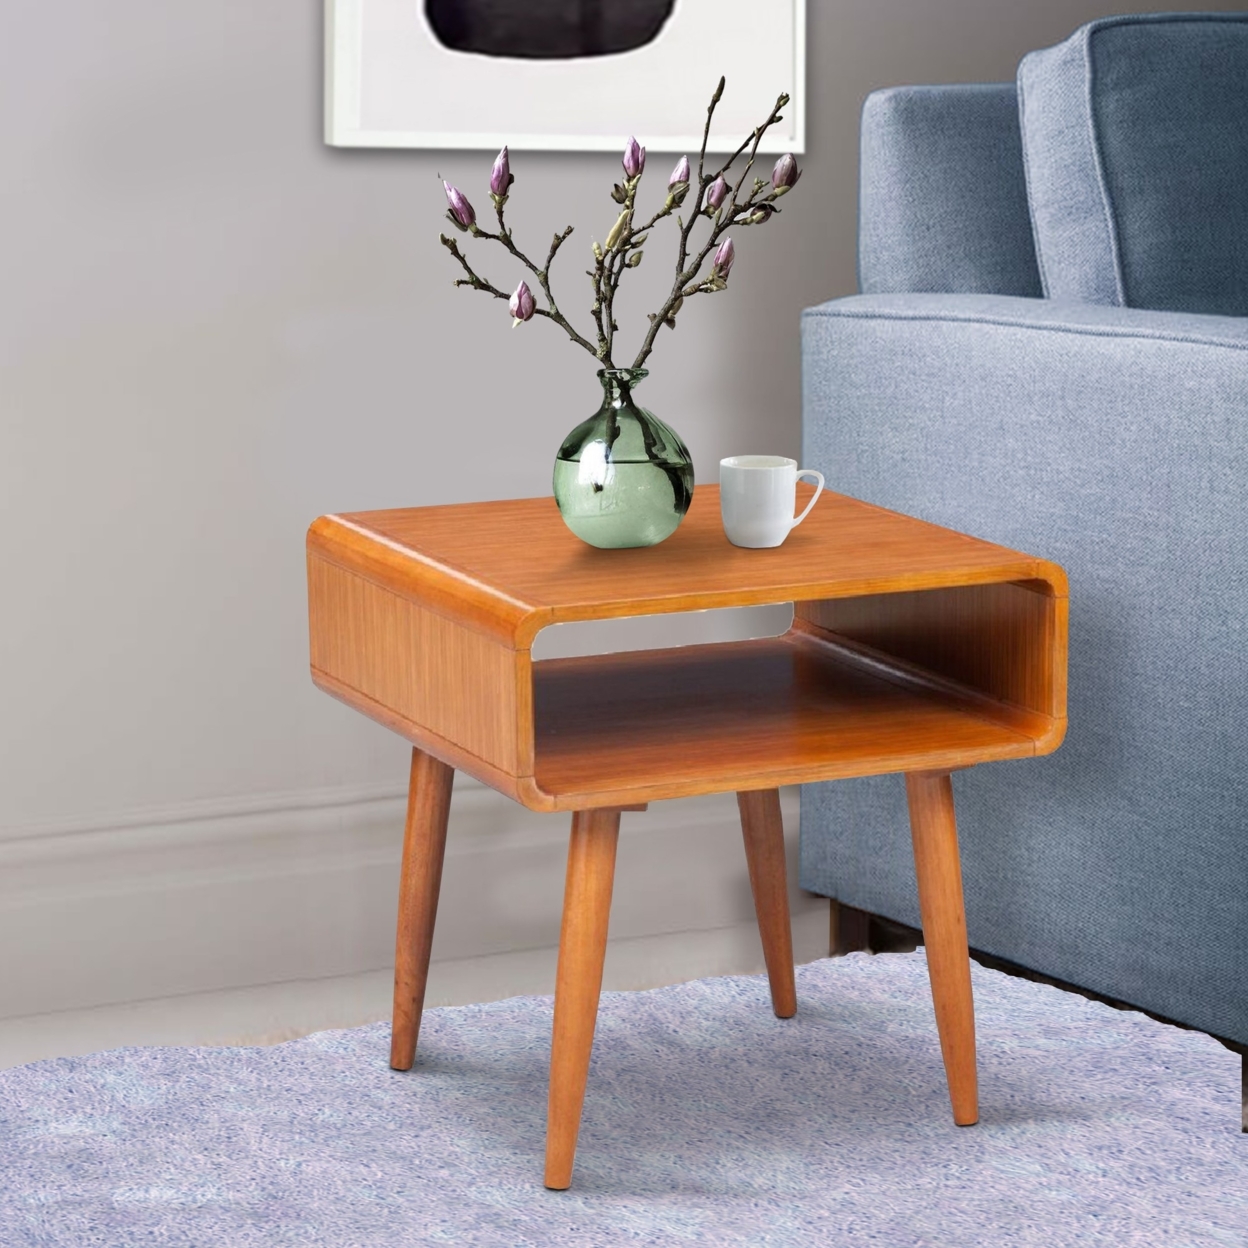 Rectangular Wooden End Table With Open Shelf And Splayed Legs, Brown- Saltoro Sherpi